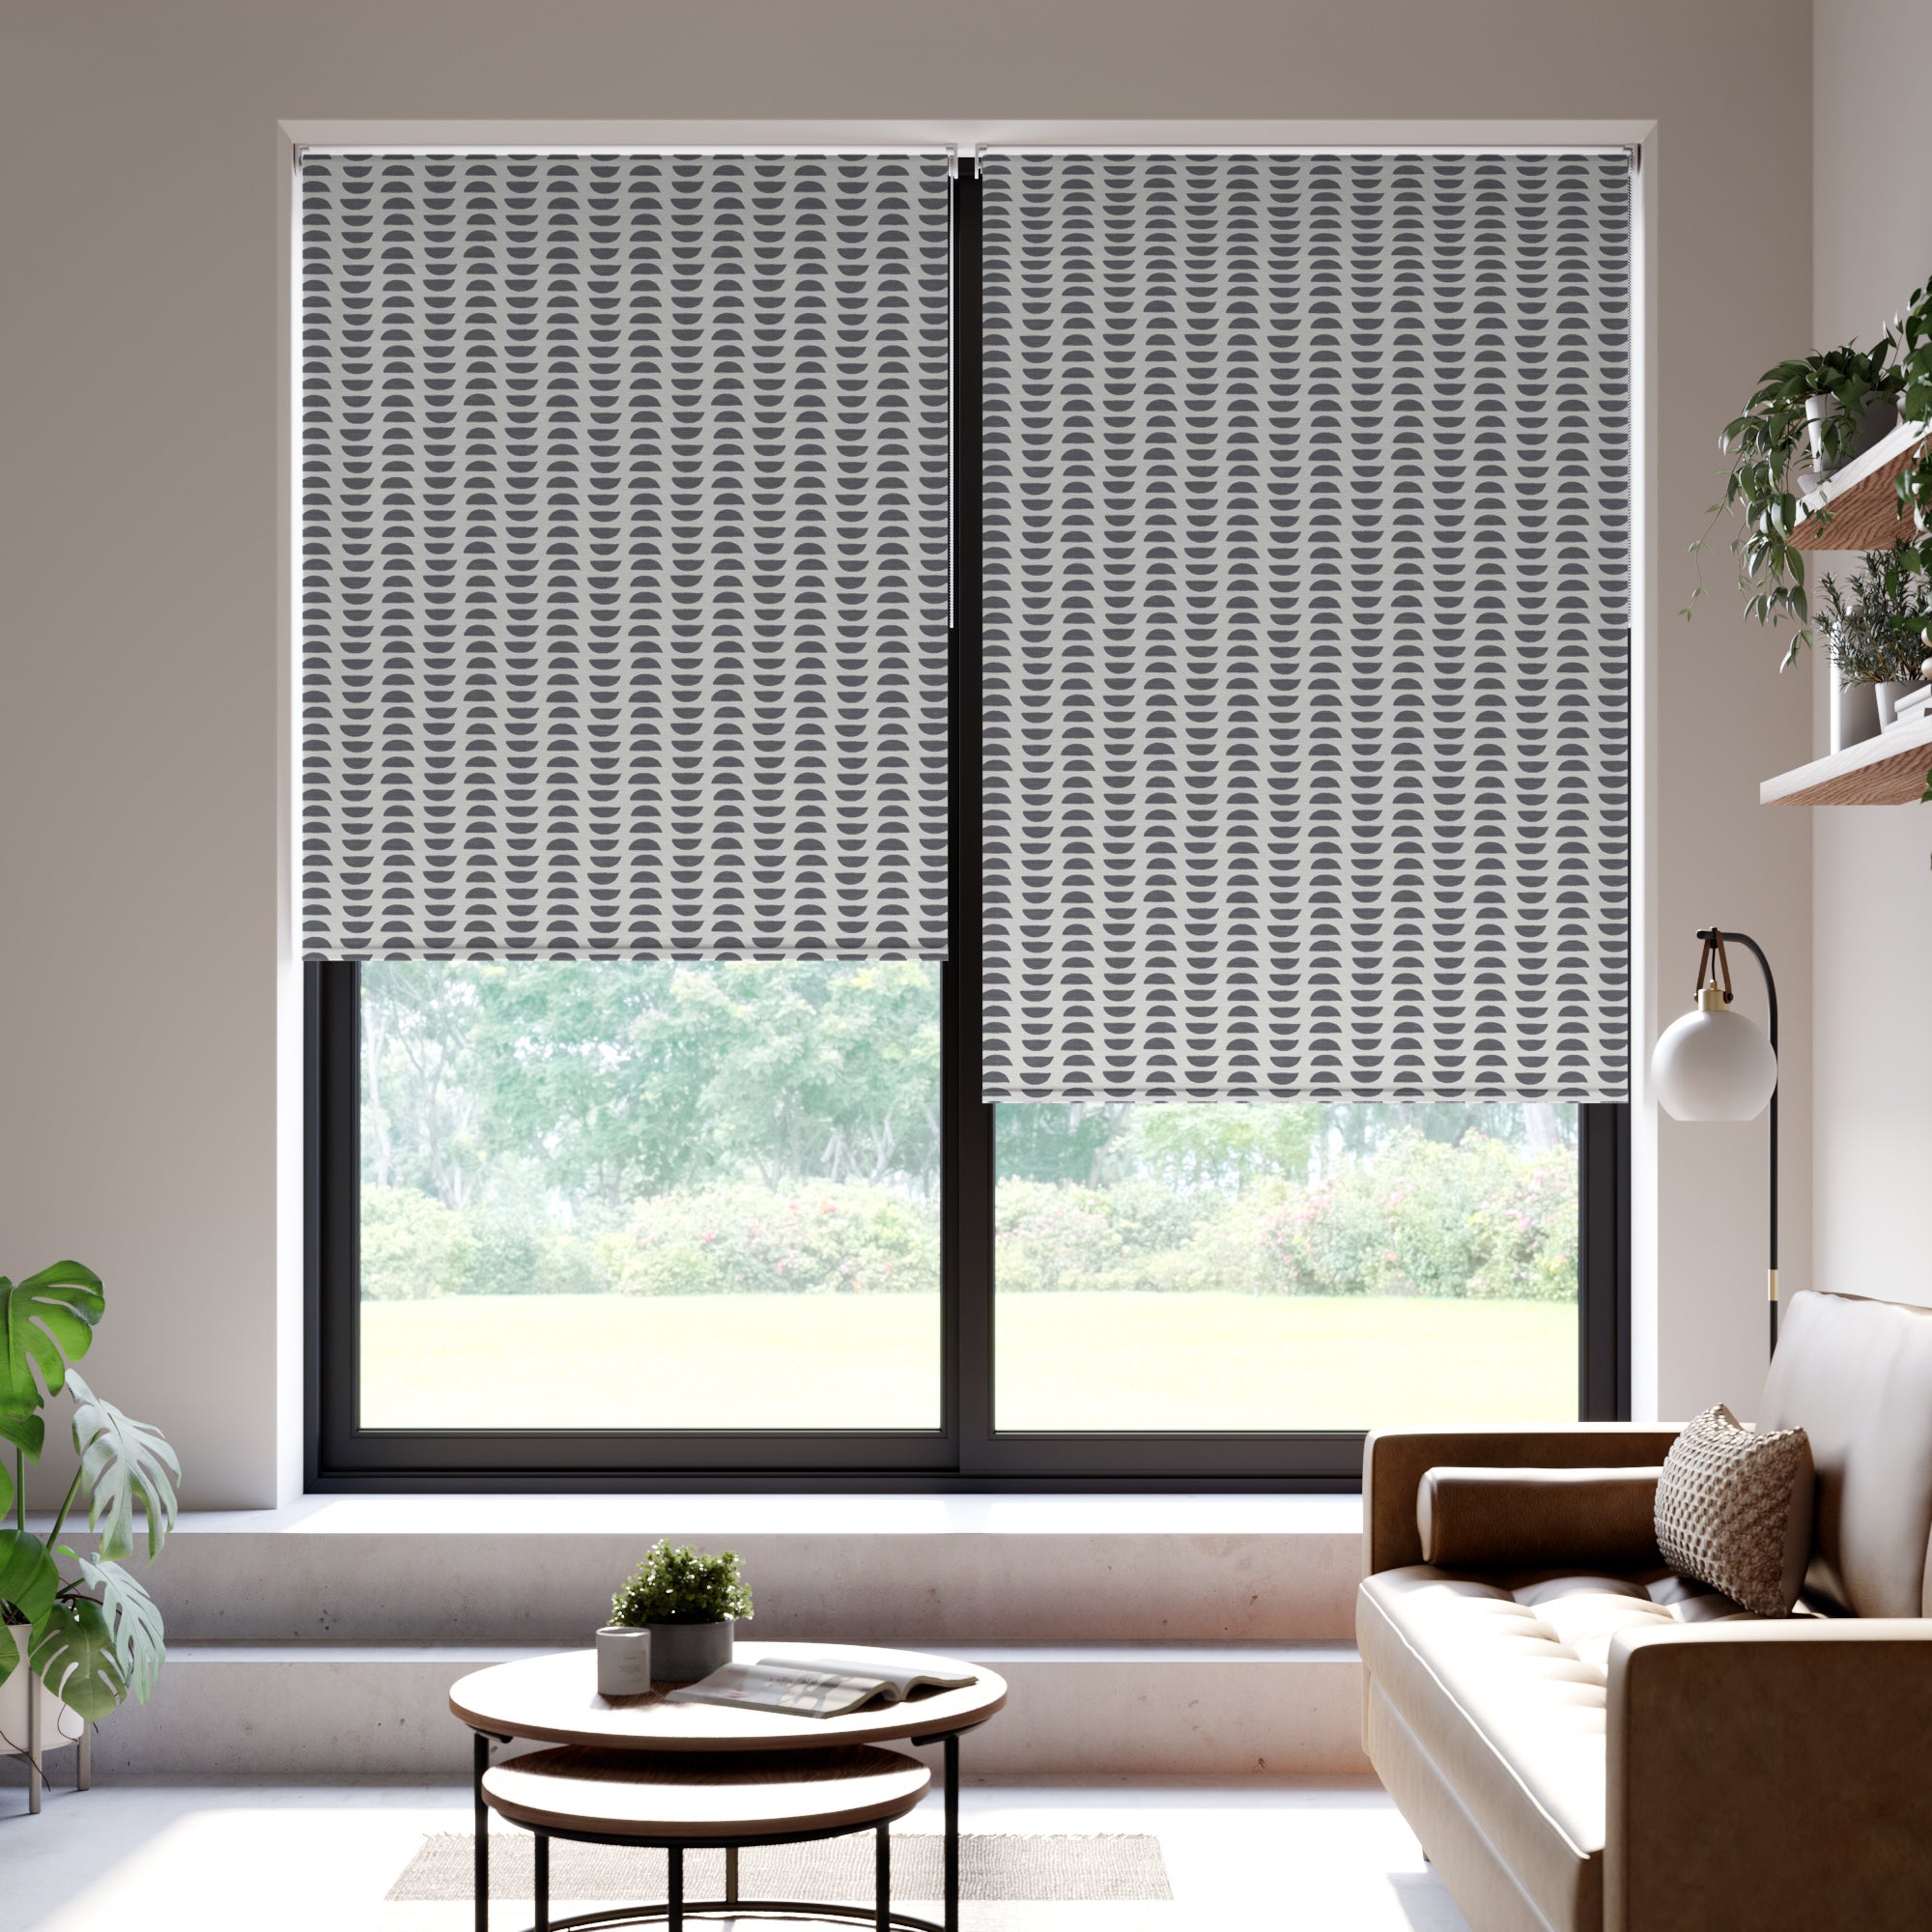 Kenzo Daylight Made to Measure Roller Blind Fabric Sample Kenzo Graphite